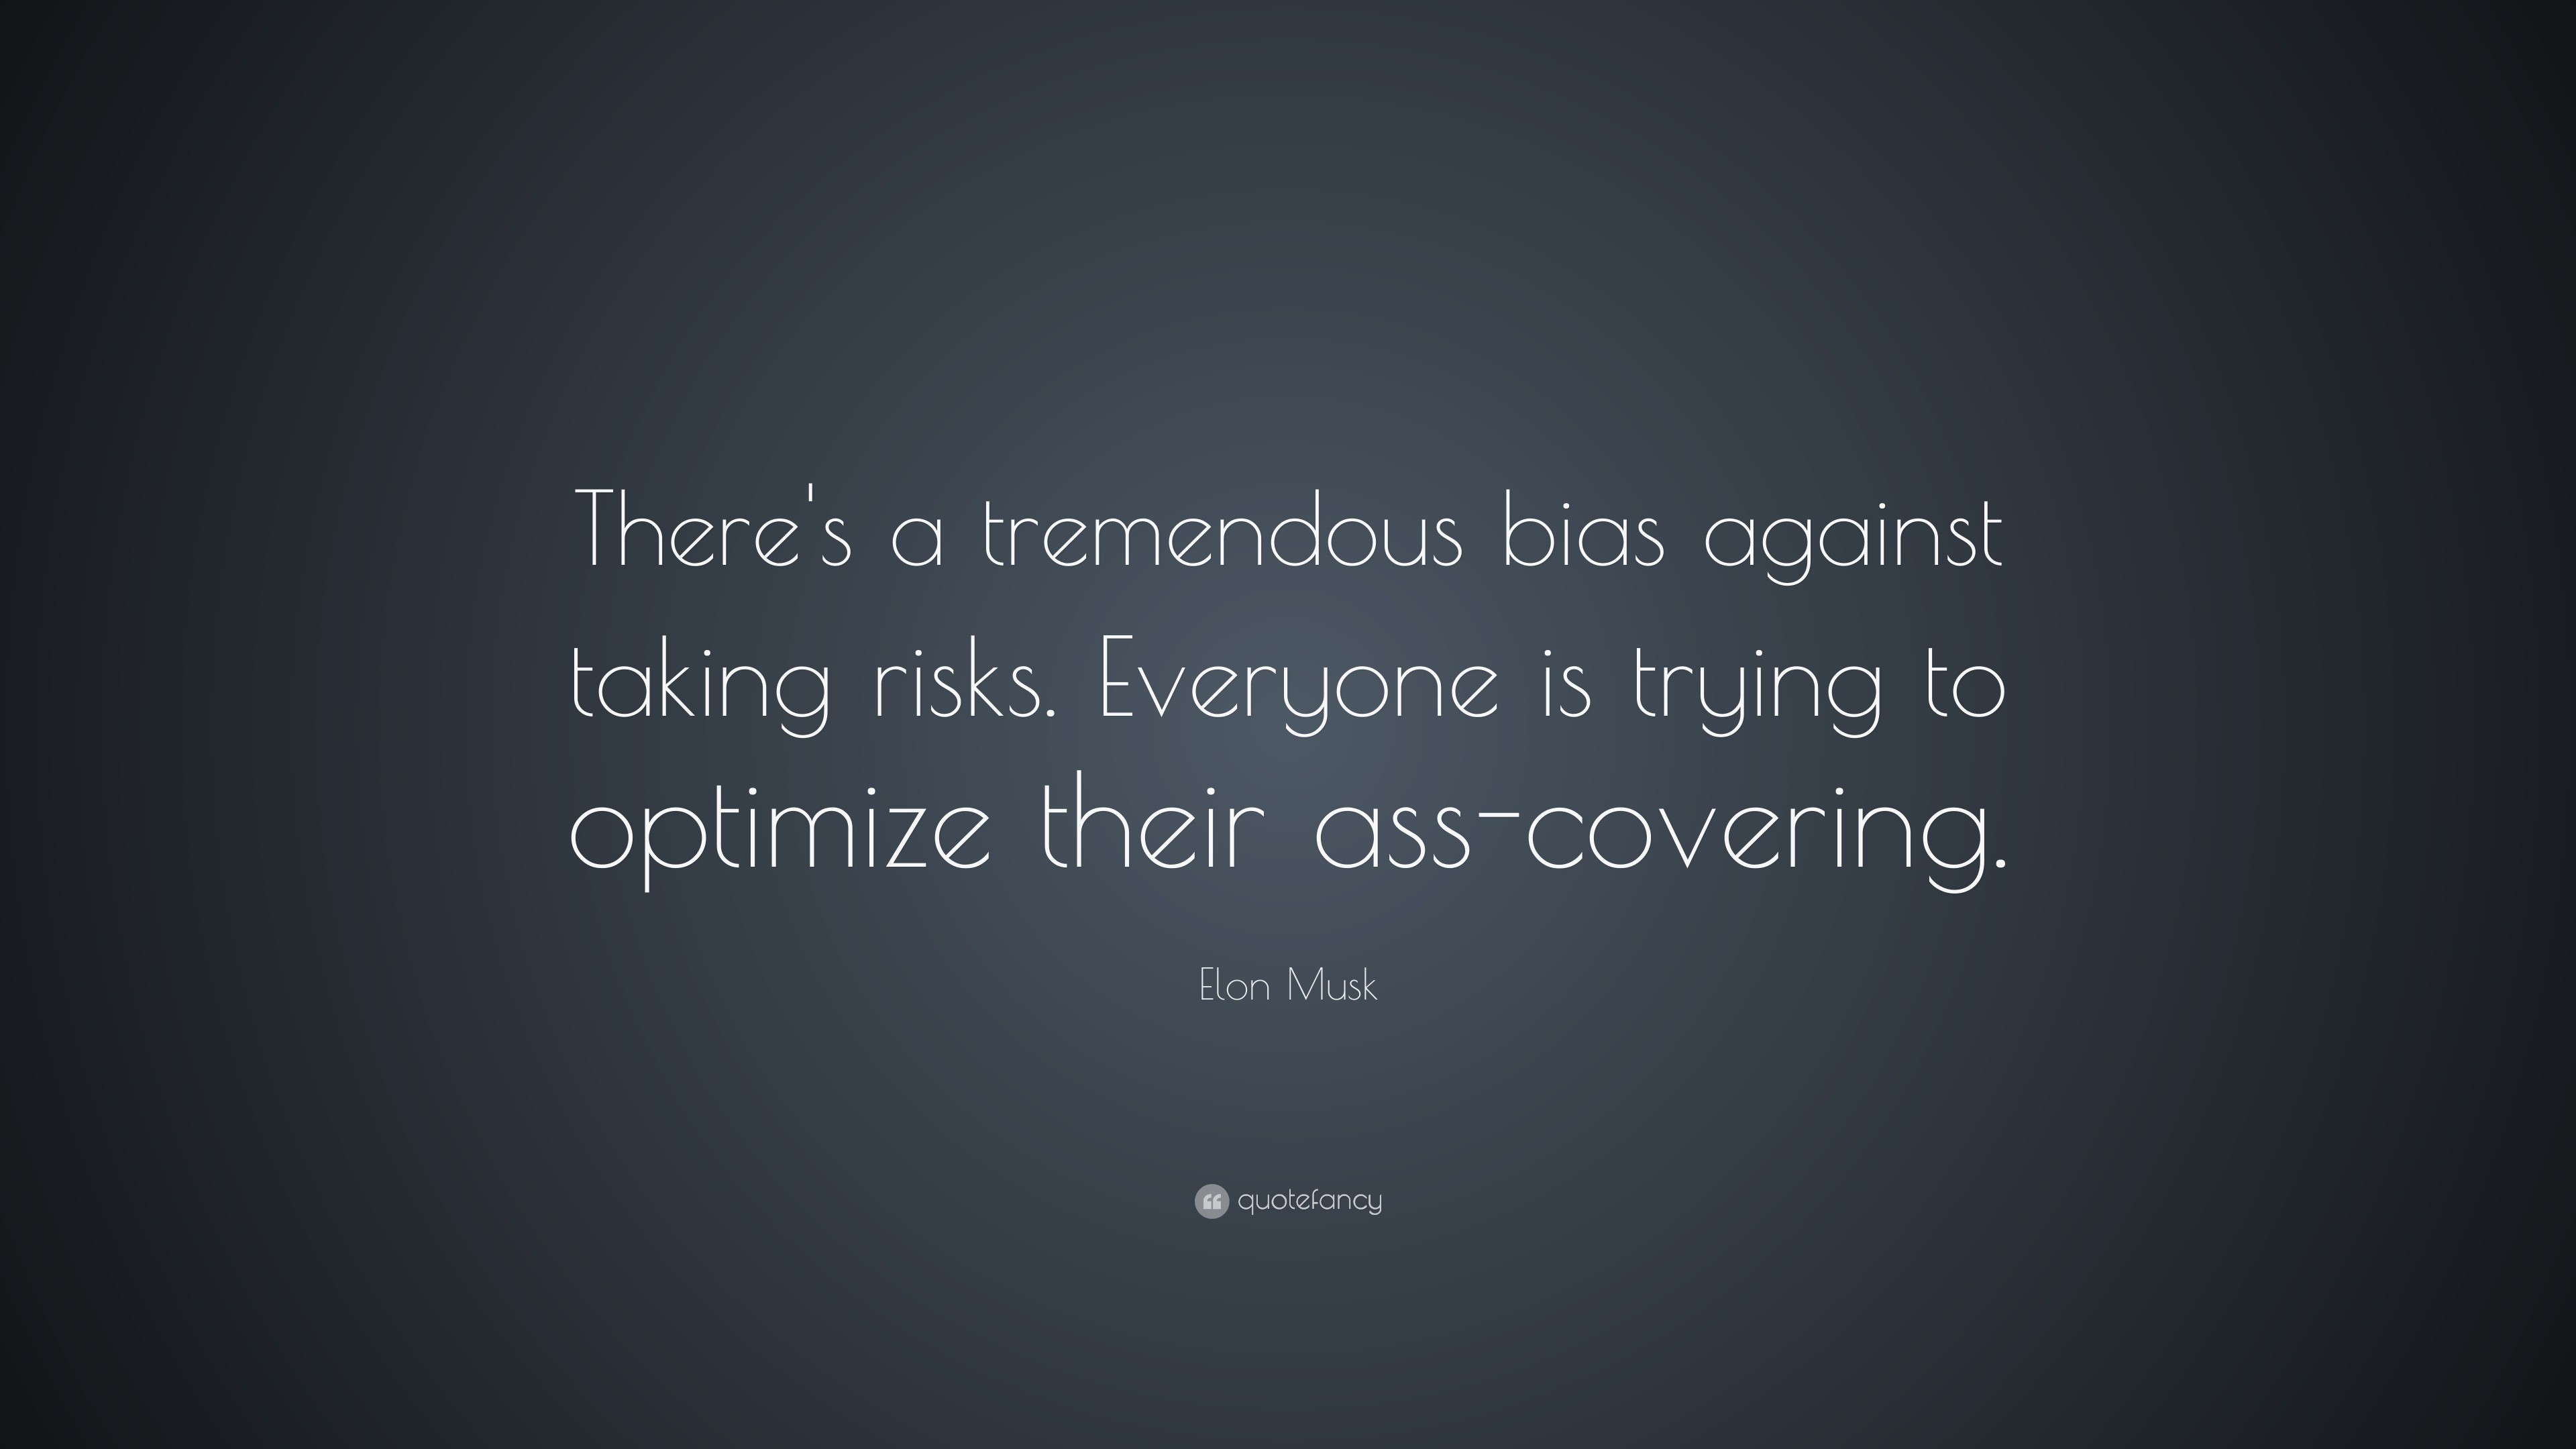 3840x2160 Elon Musk Quote: “There's a tremendous bias against taking risks. Everyone  is trying